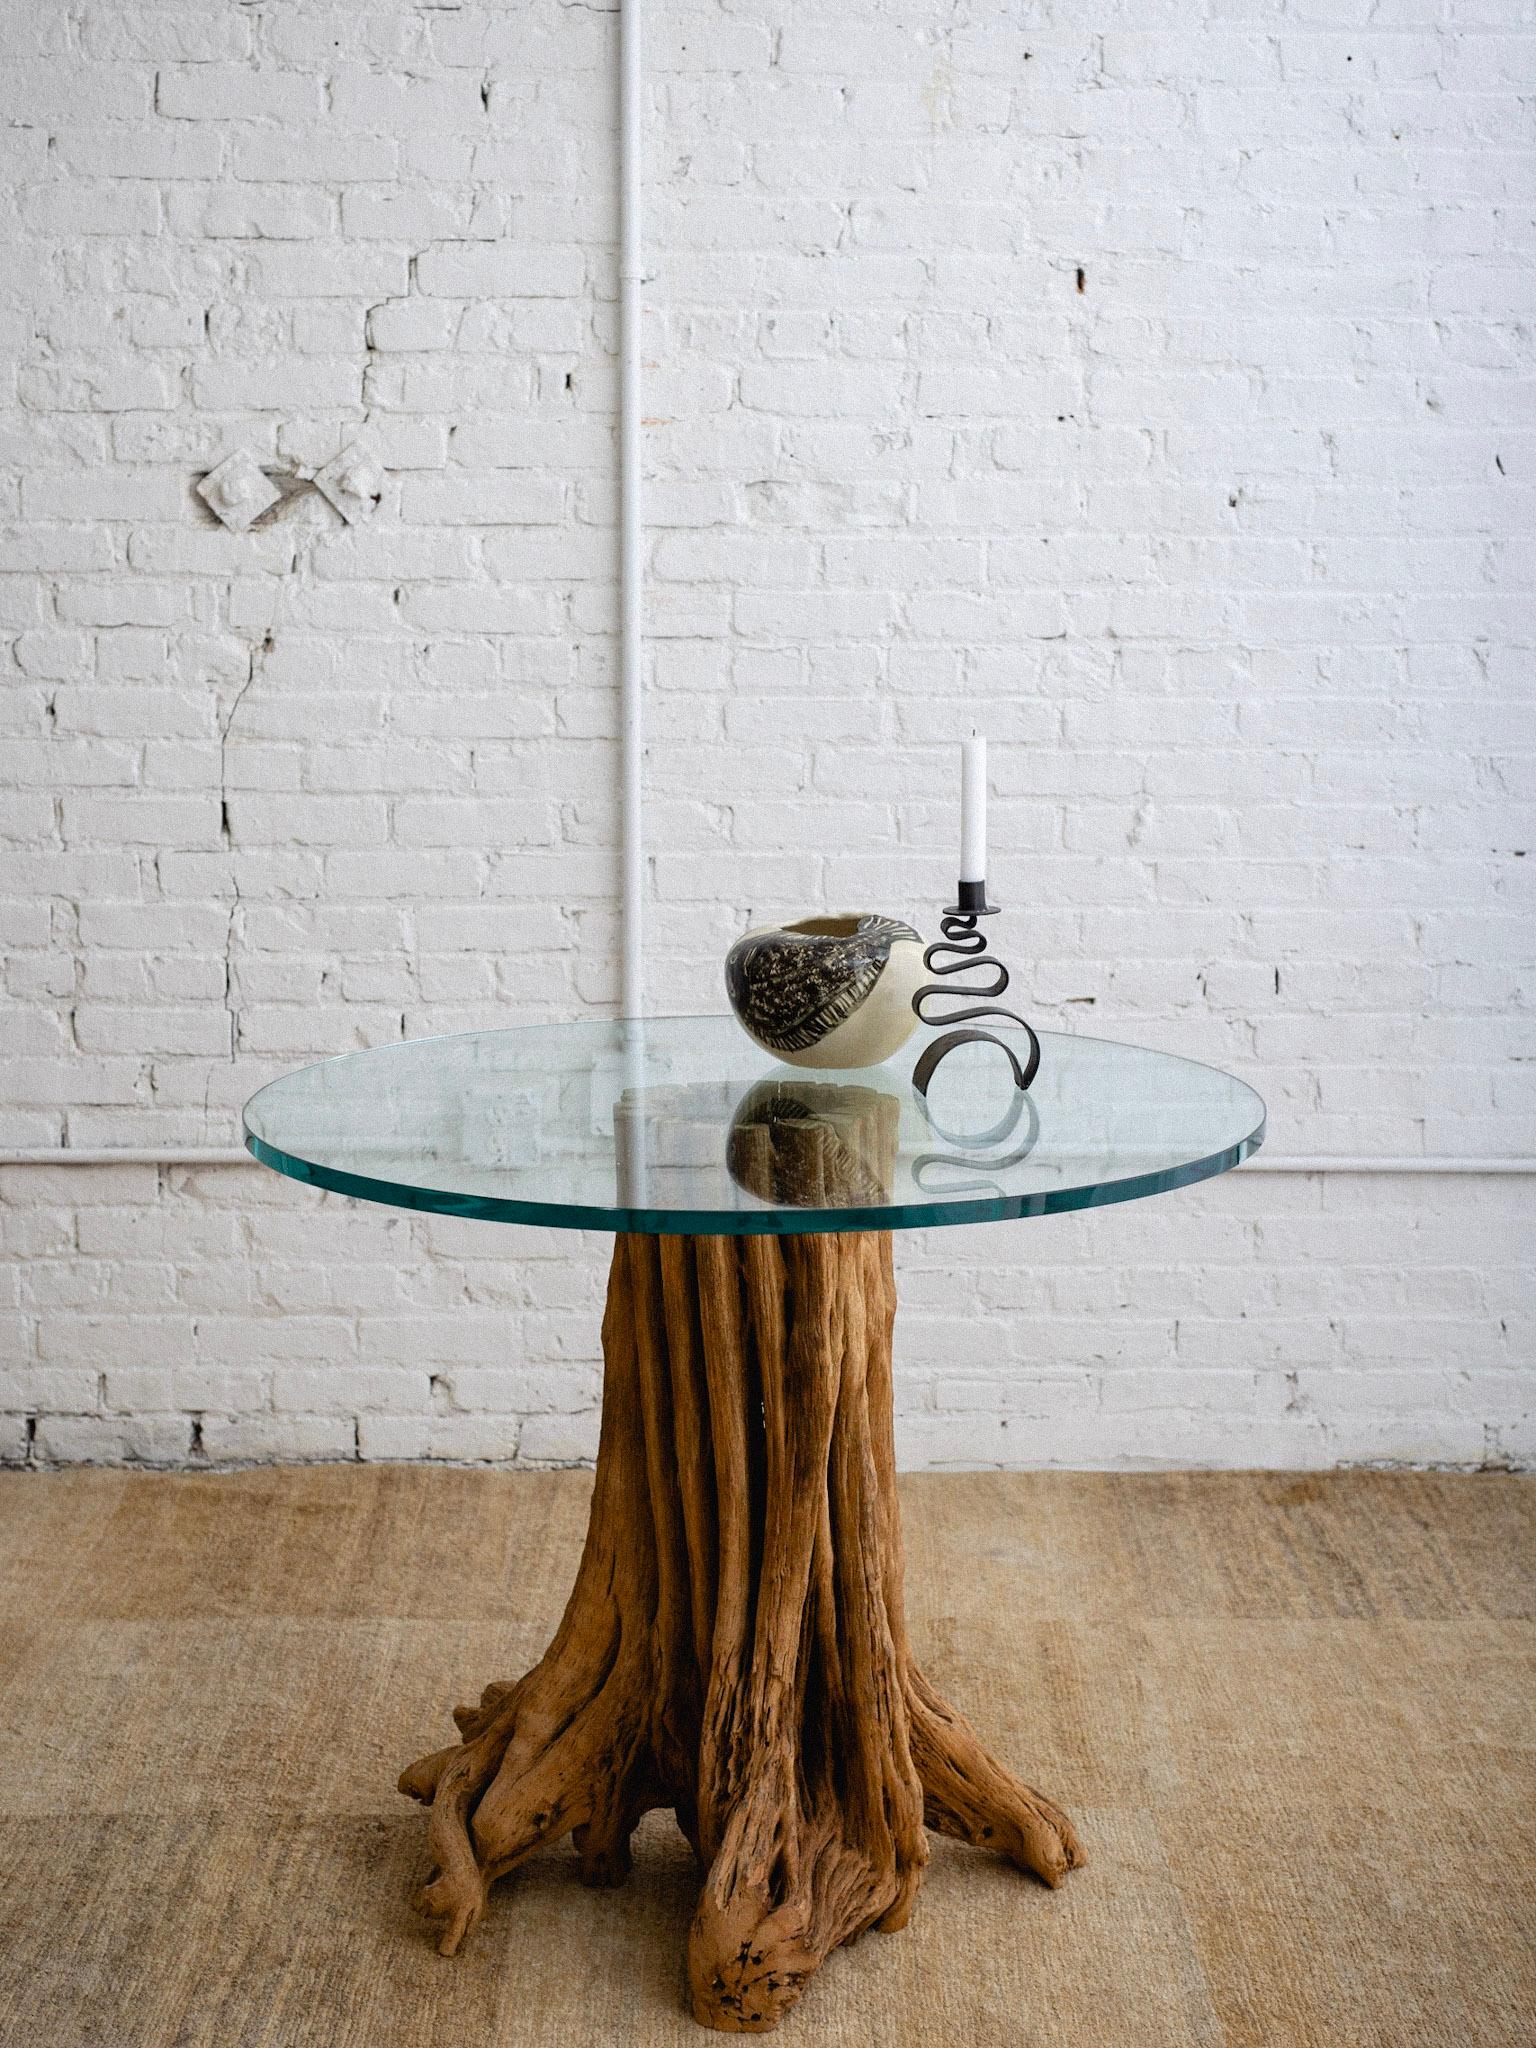 Saguaro Cactus Dining Table With Glass Top For Sale 6